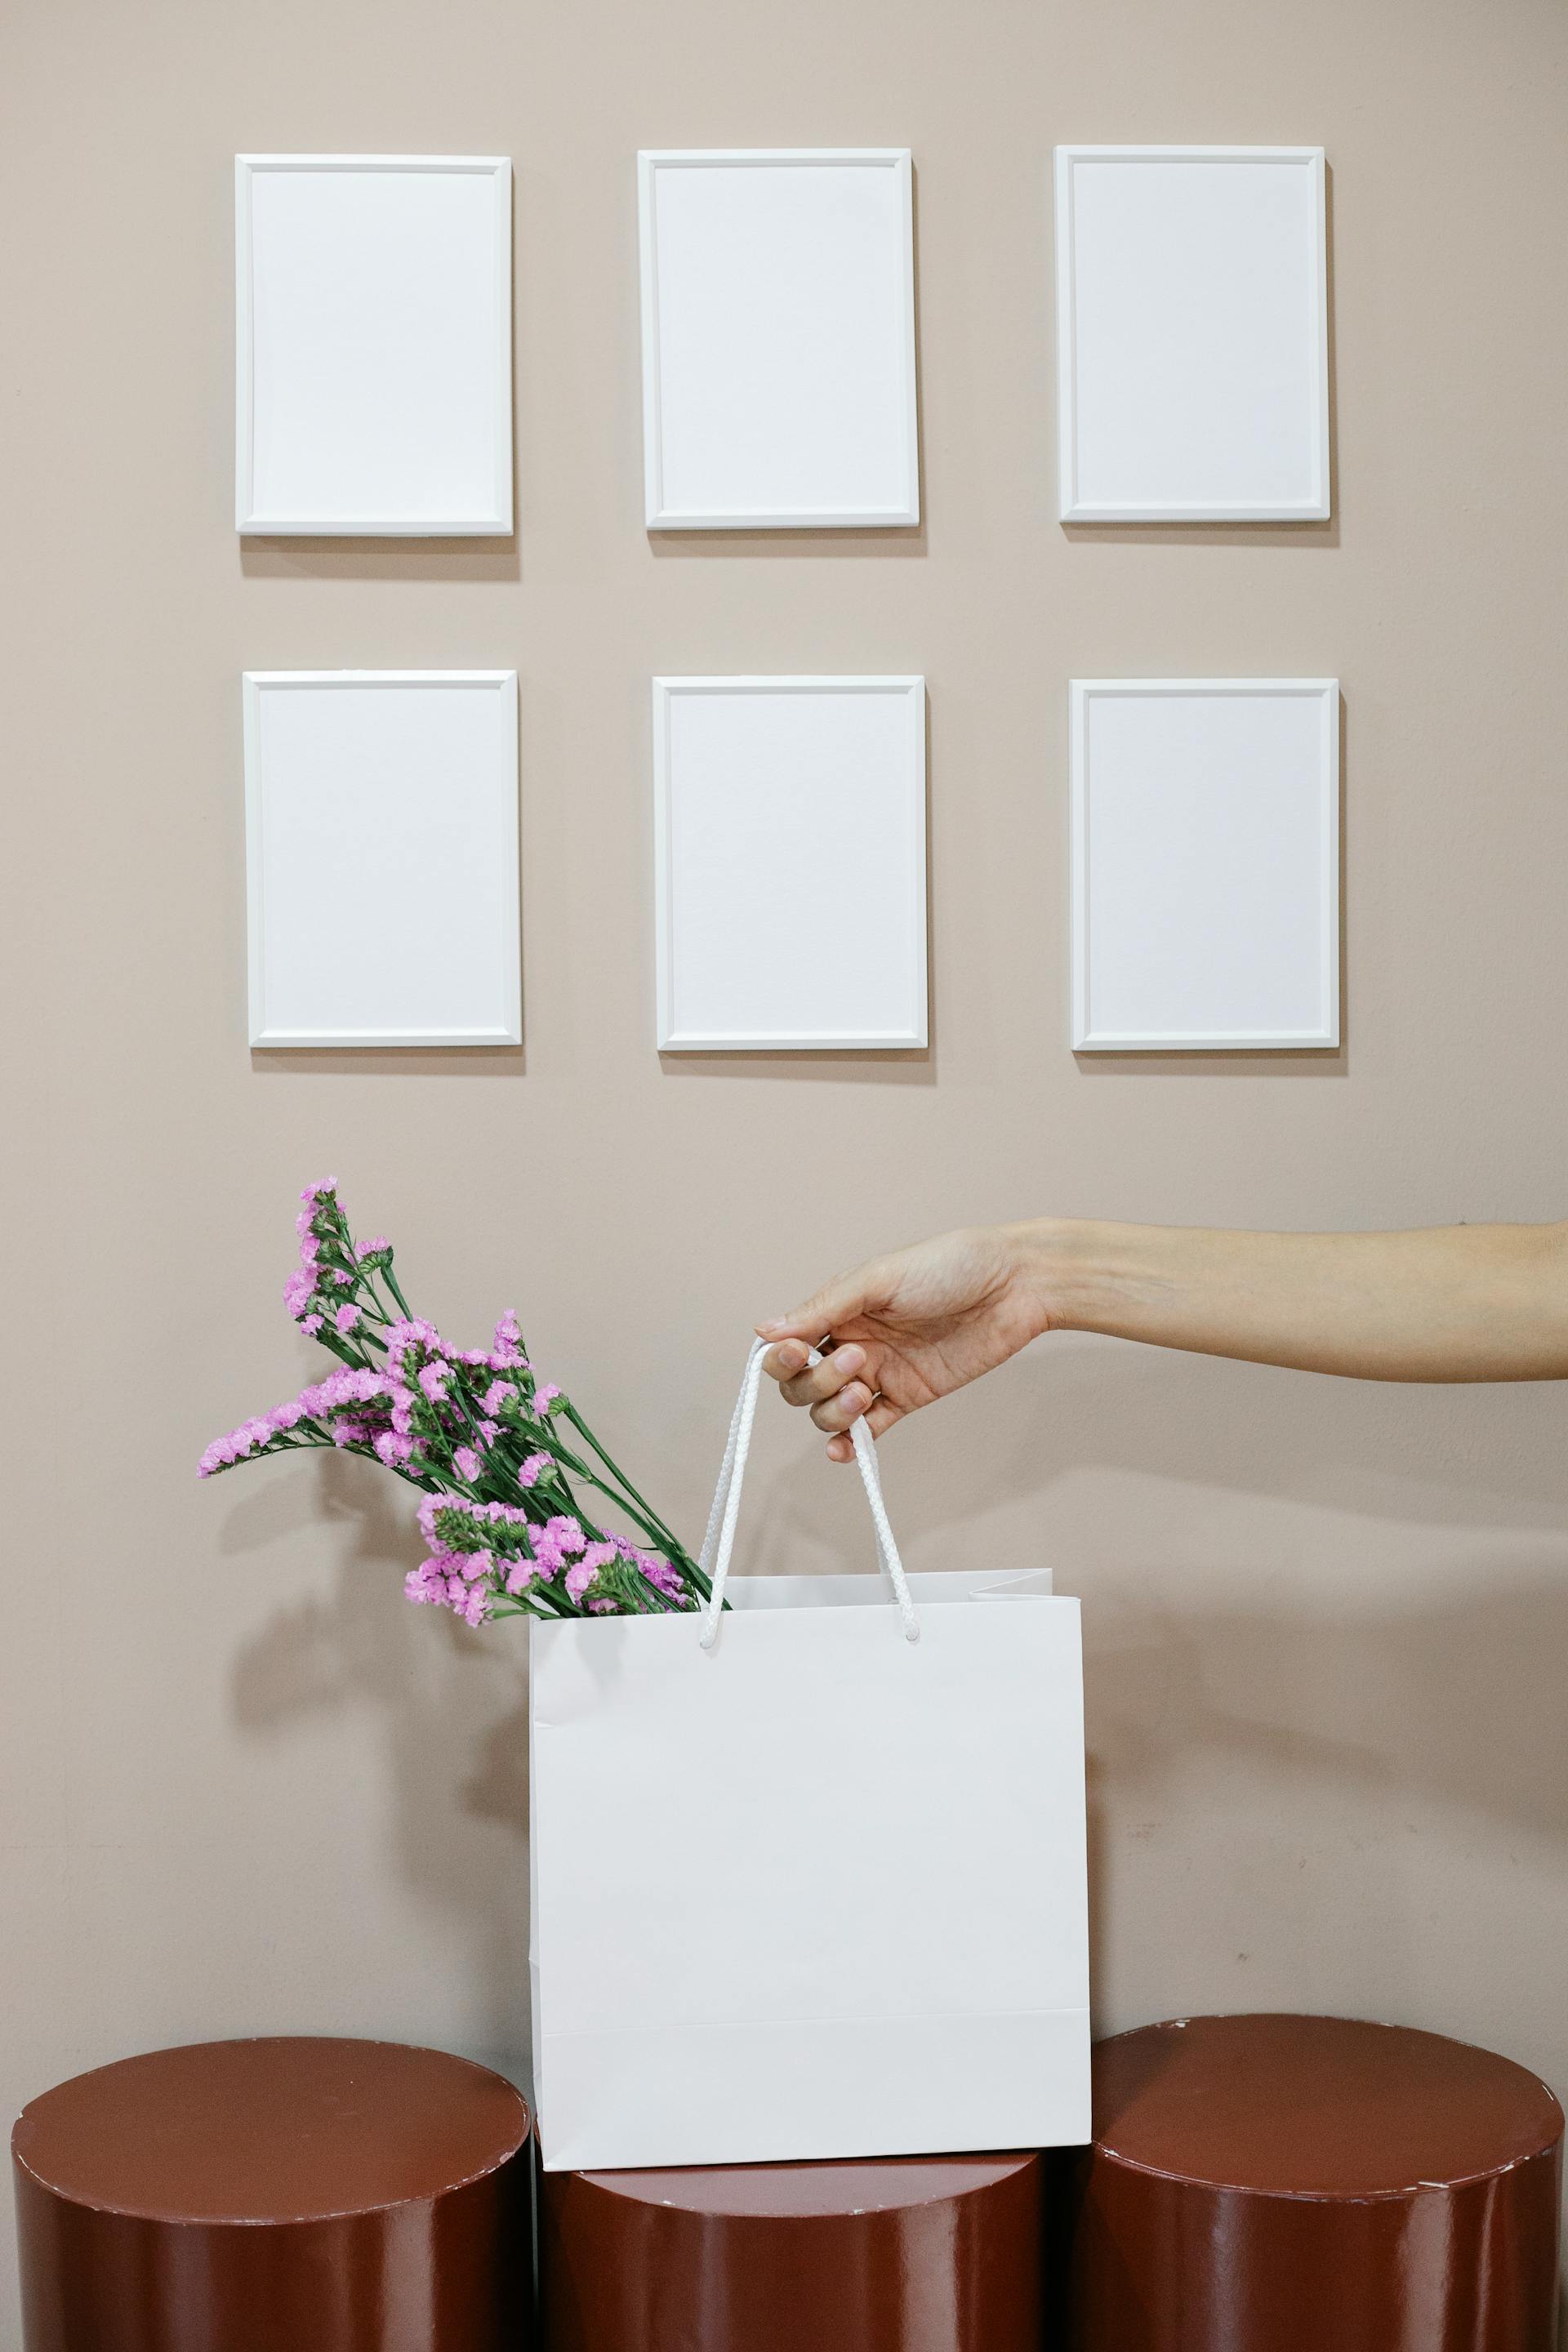 A close-up photo of a woman holding a paper bag with flowers near a wall with blank frames | Source: Pexels